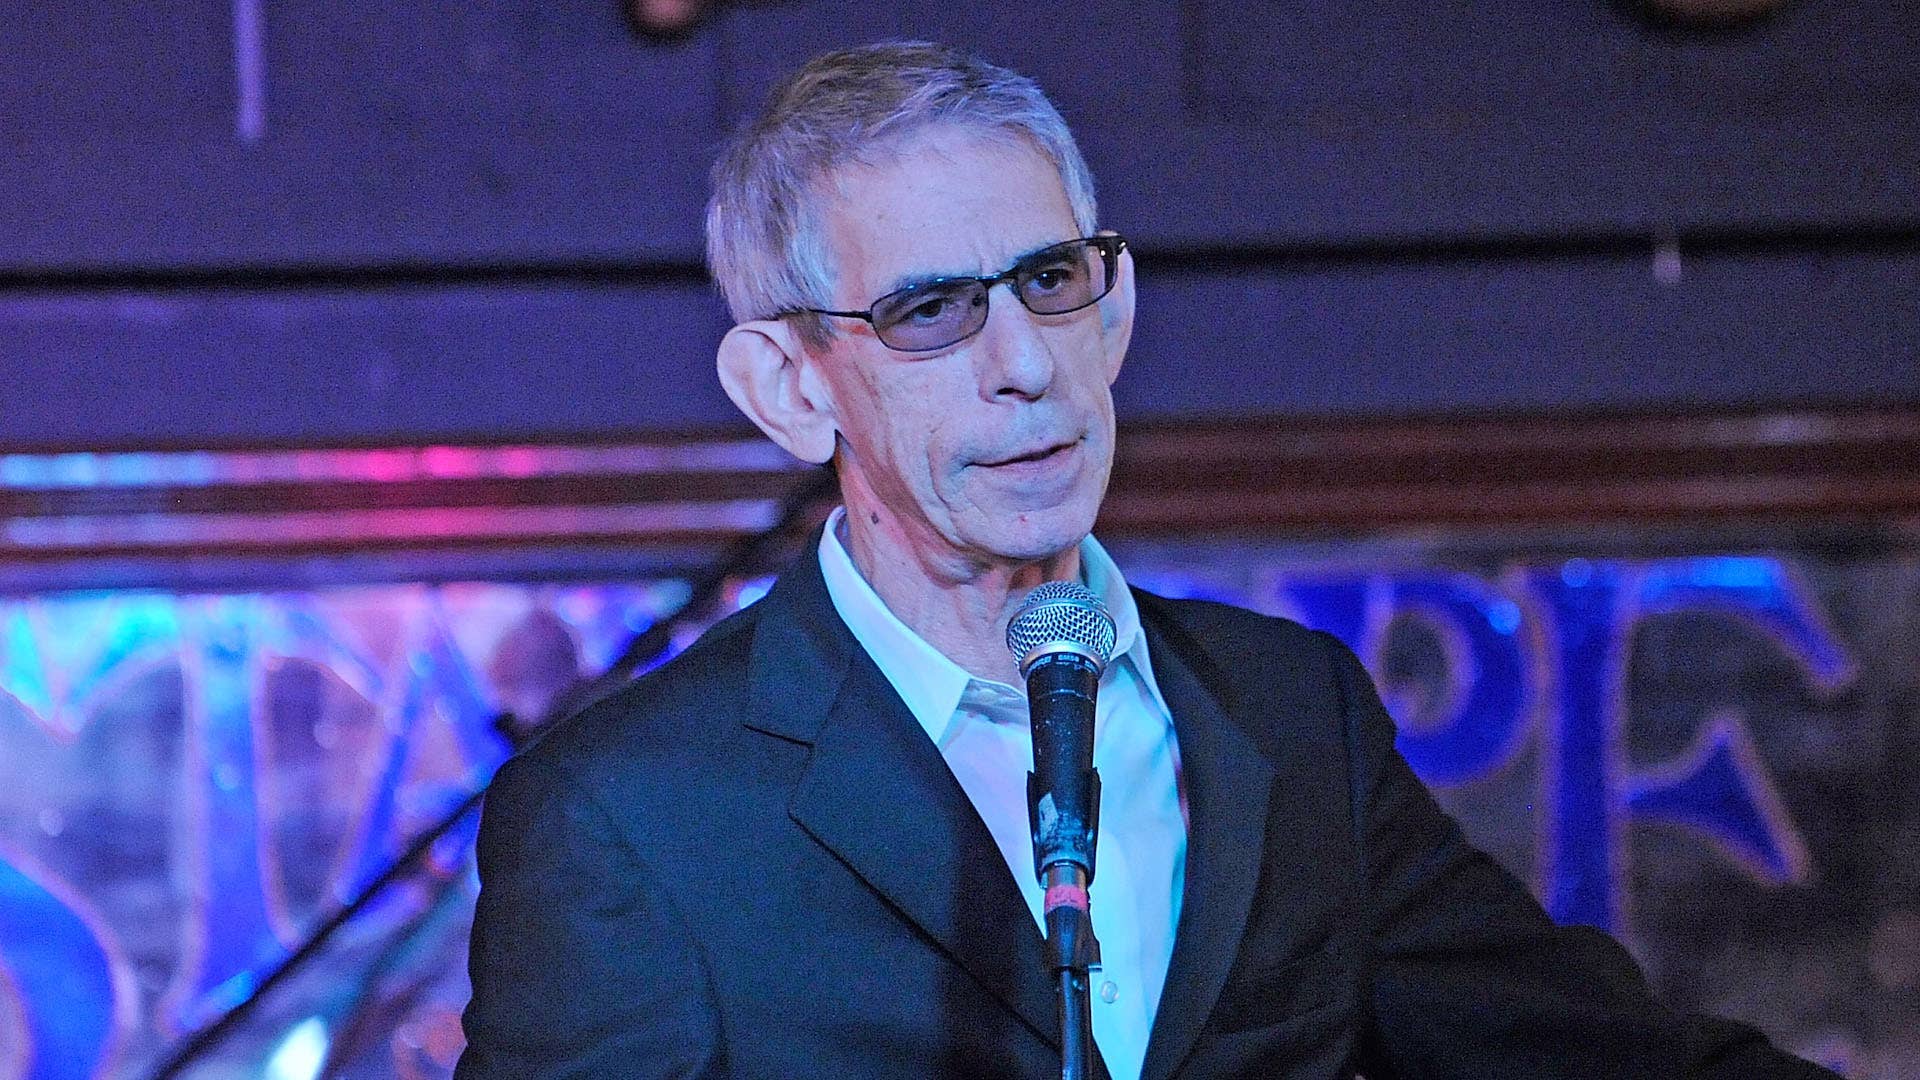 Richard Belzer performs at The Stanhope House on November 23, 2012